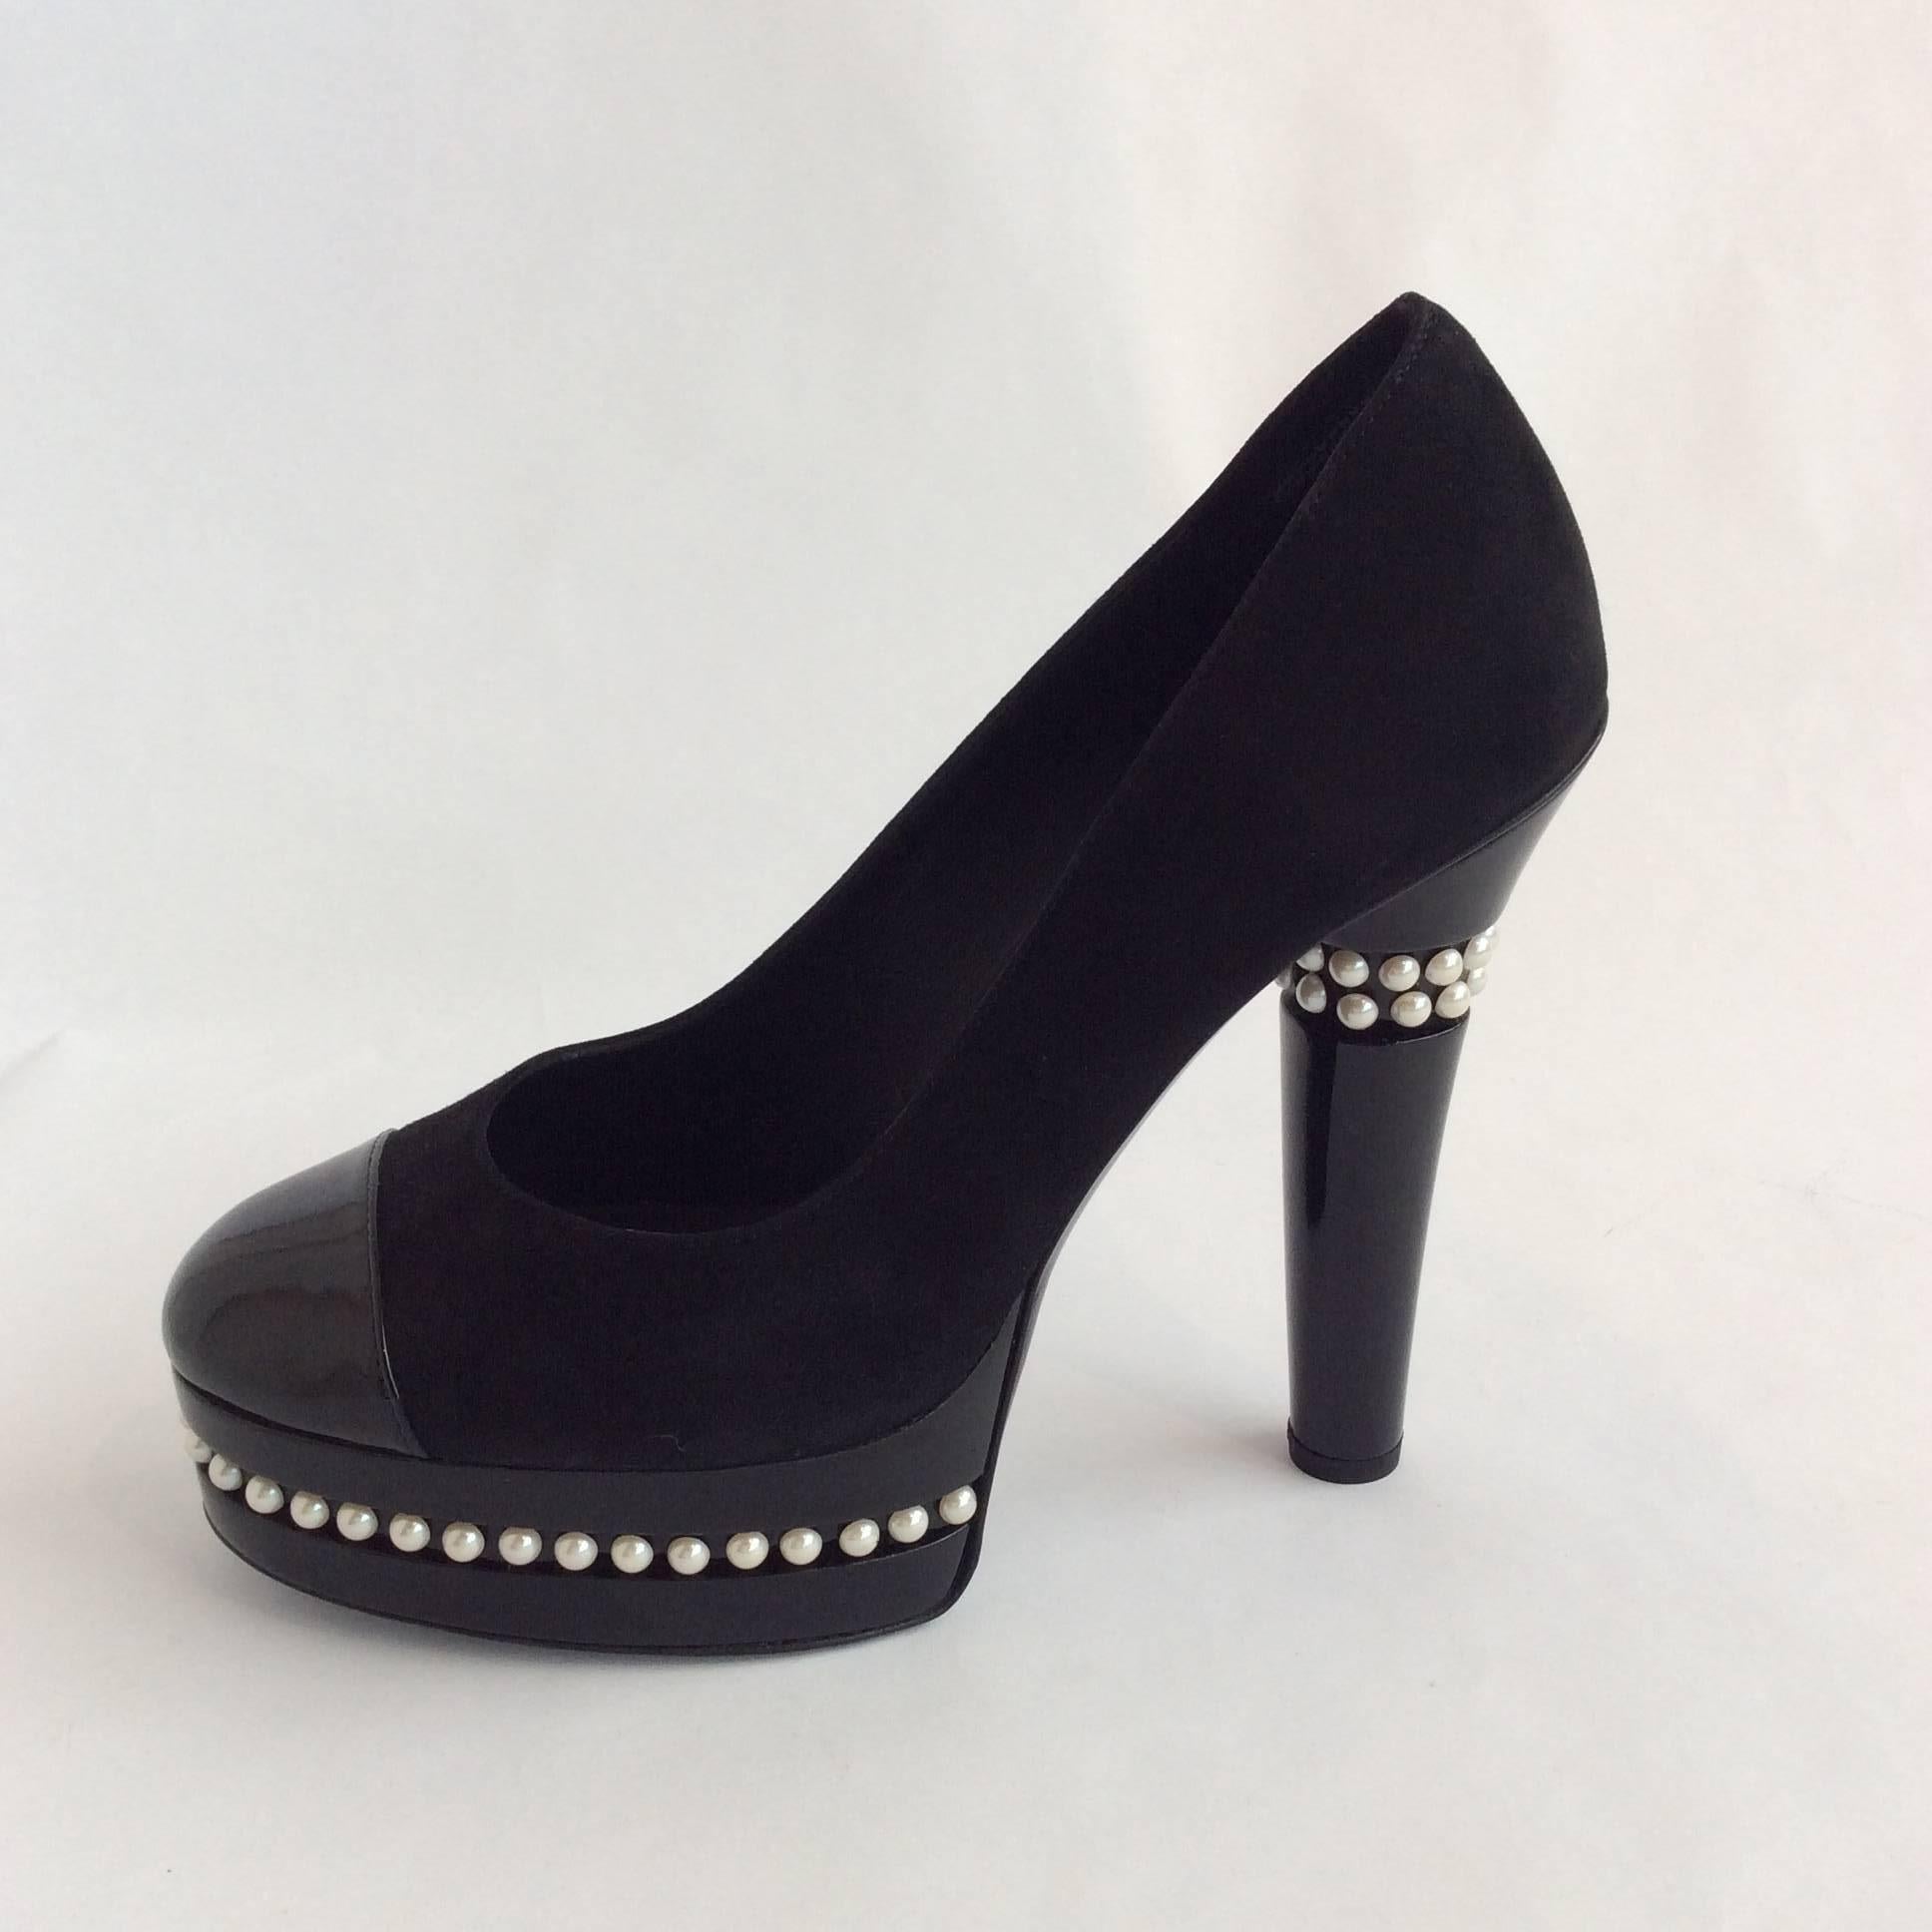 Chanel Black Suede And Patent Leather Platform Pumps With Pearl Detail Sz38 1